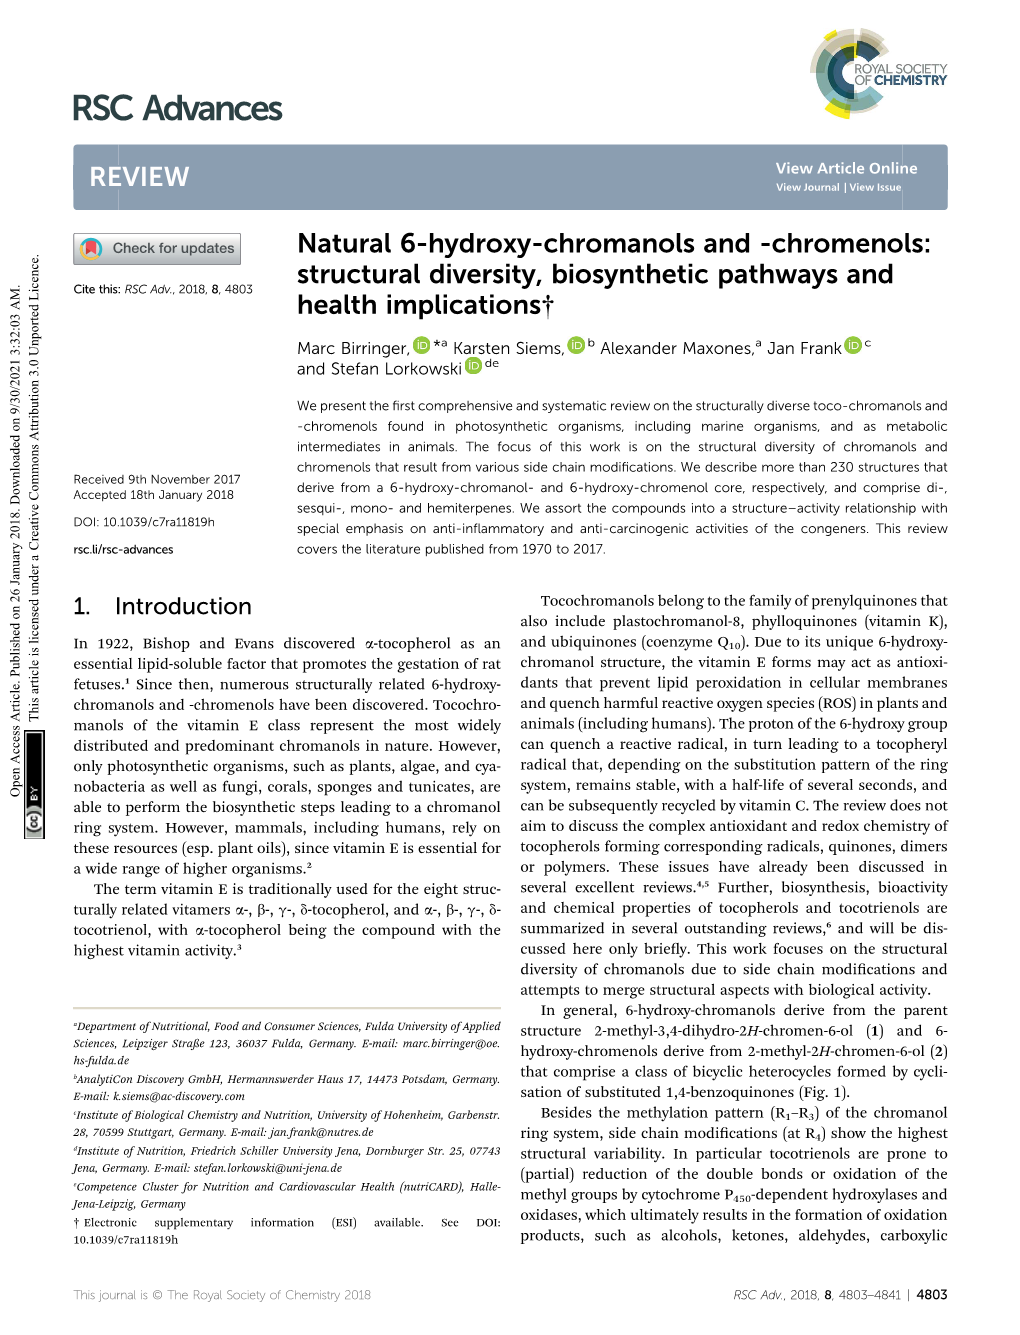 Natural 6-Hydroxy-Chromanols and -Chromenols: Structural Diversity, Biosynthetic Pathways and Health Implications